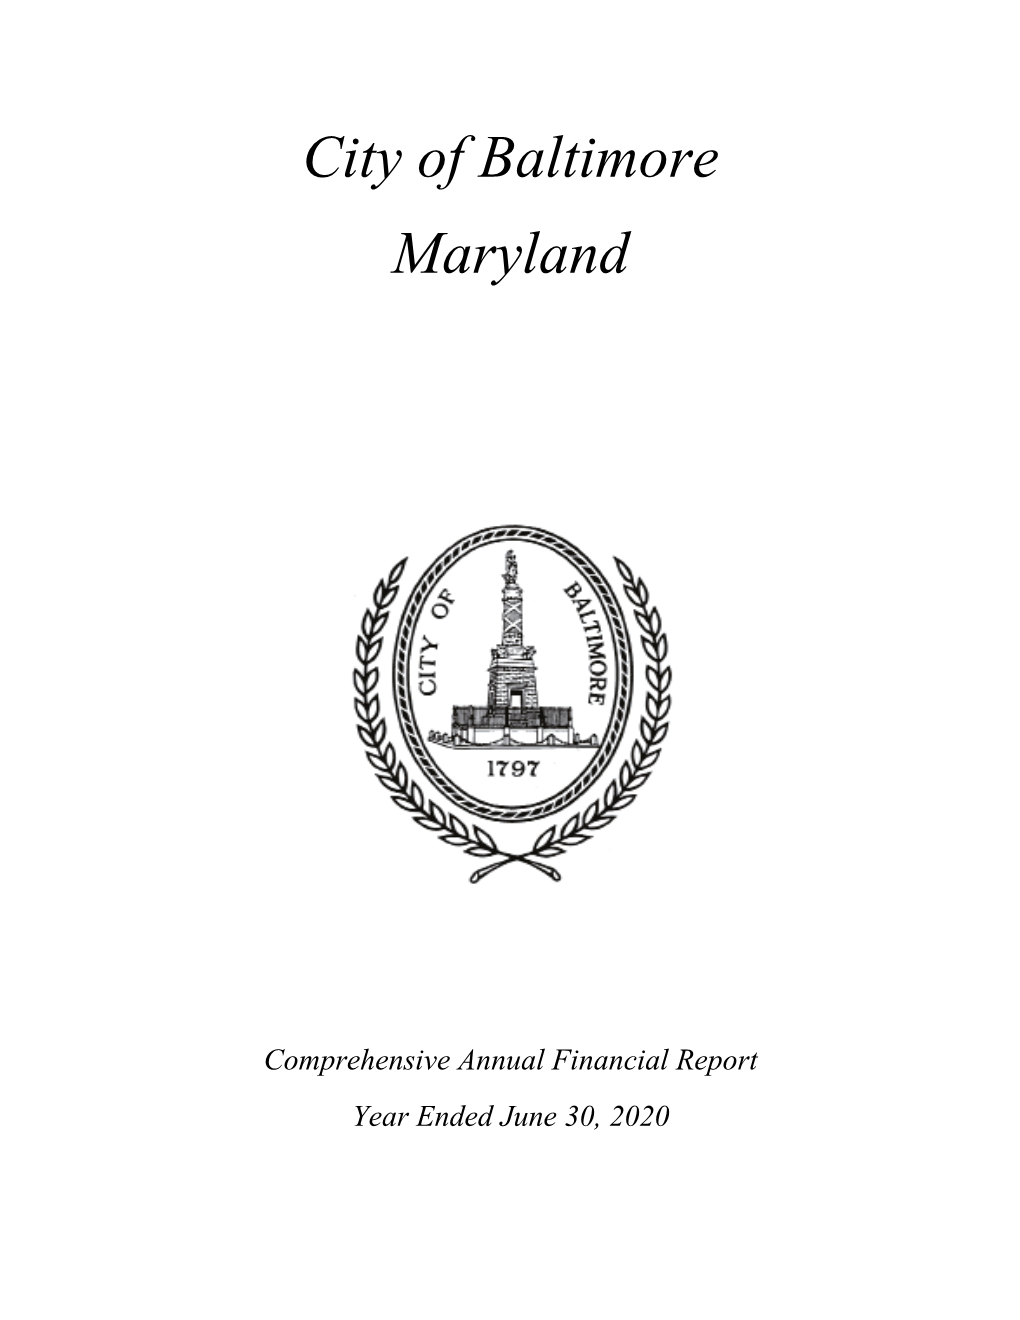 Fiscal Year 2020 Sales Tax Receipts Reported by the State of Maryland for Baltimore City Show a Decrease of 13.9% Compared to the Prior Year